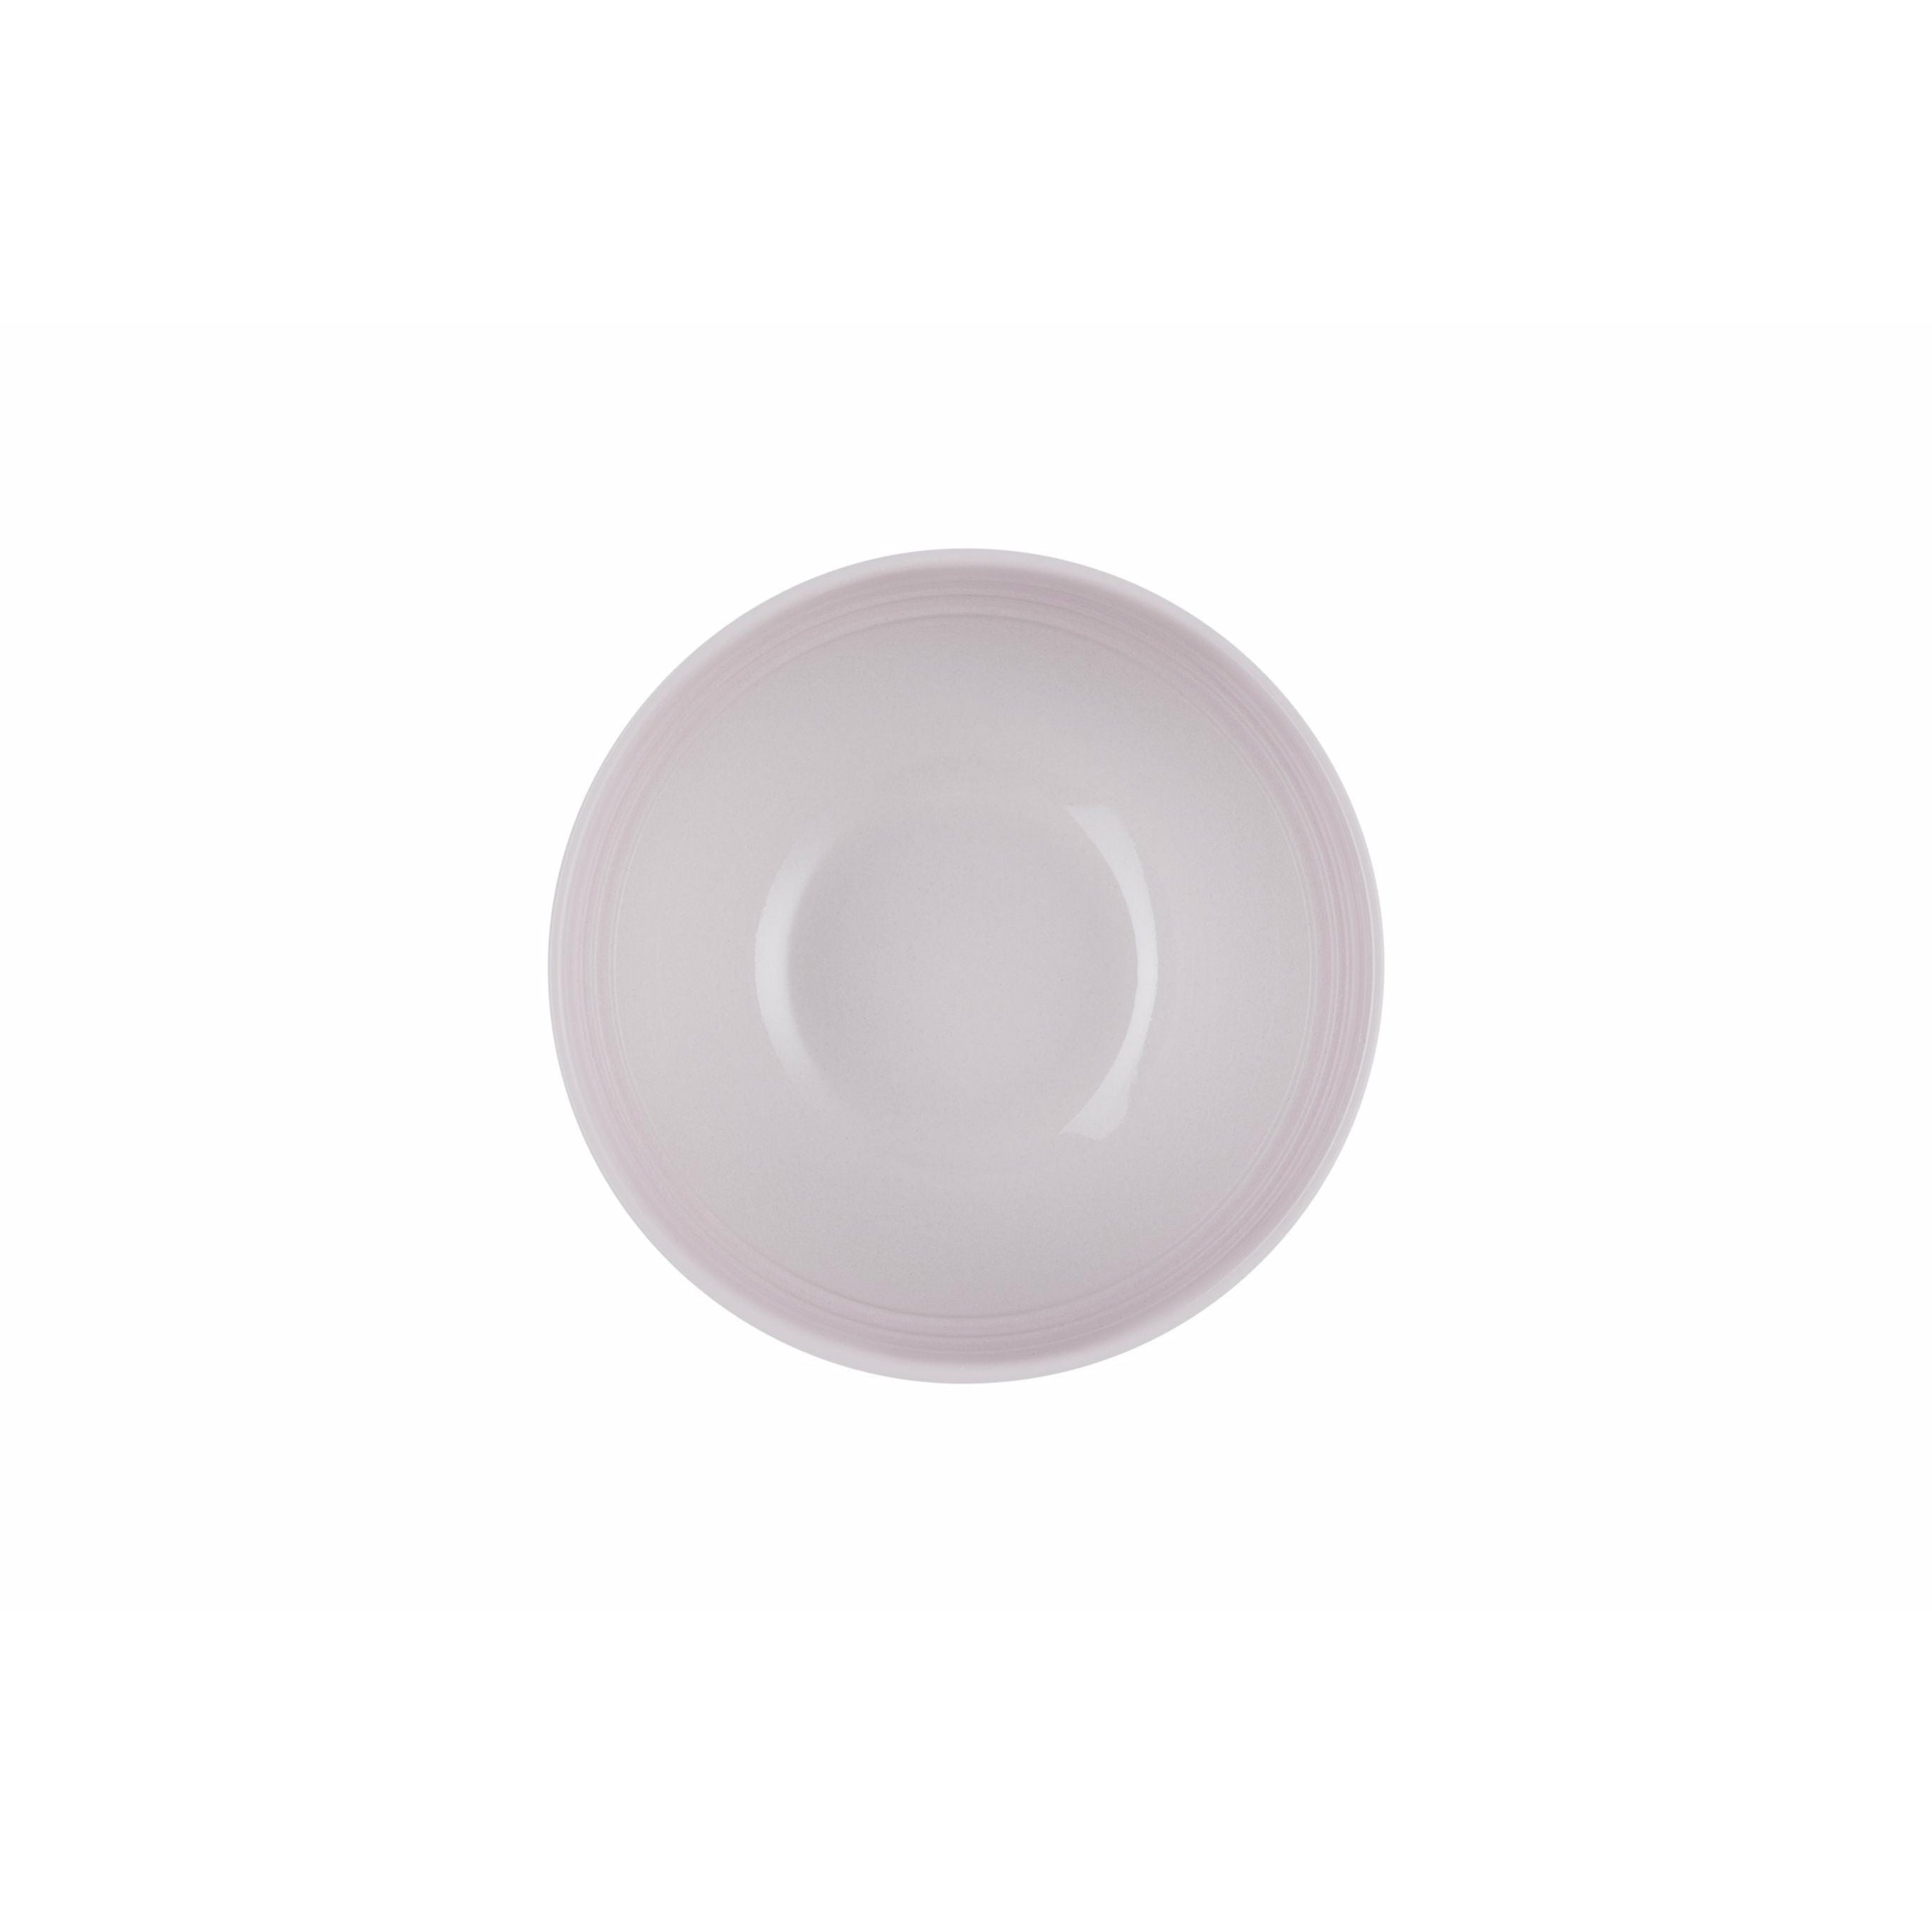 Le Creuset Snack Bowl 12 Cm, Shell Pink